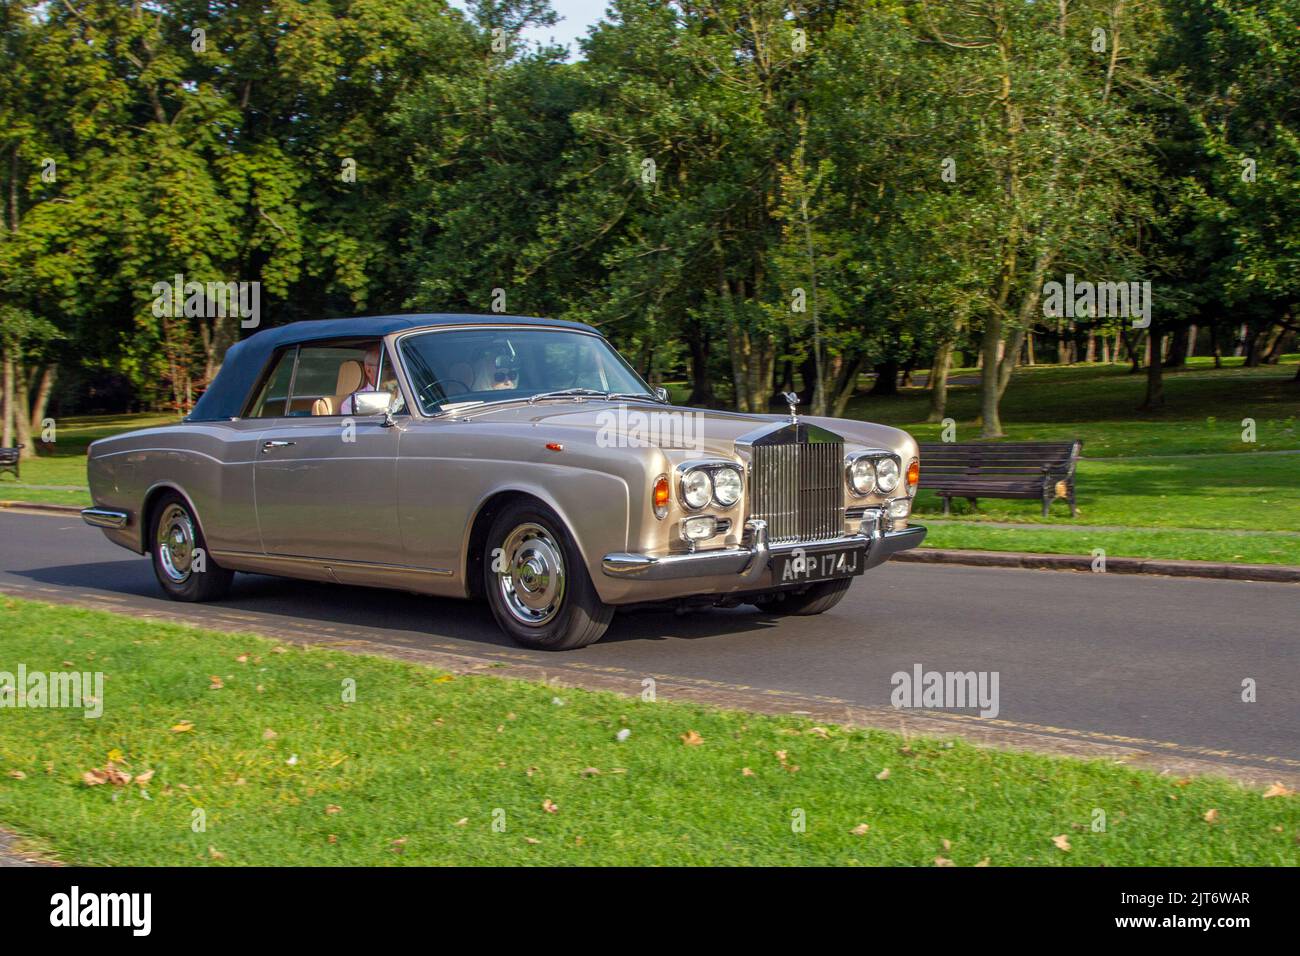 1970 70s seventies Gold British ROLLS ROYCE 6750cc petrol luxury saloon; arriving at the annual Stanley Park Classic Car Show in the Italian Gardens. Stanley Park classics yesteryear Motor Show Hosted By Blackpool Vintage Vehicle Preservation Group, UK. Stock Photo